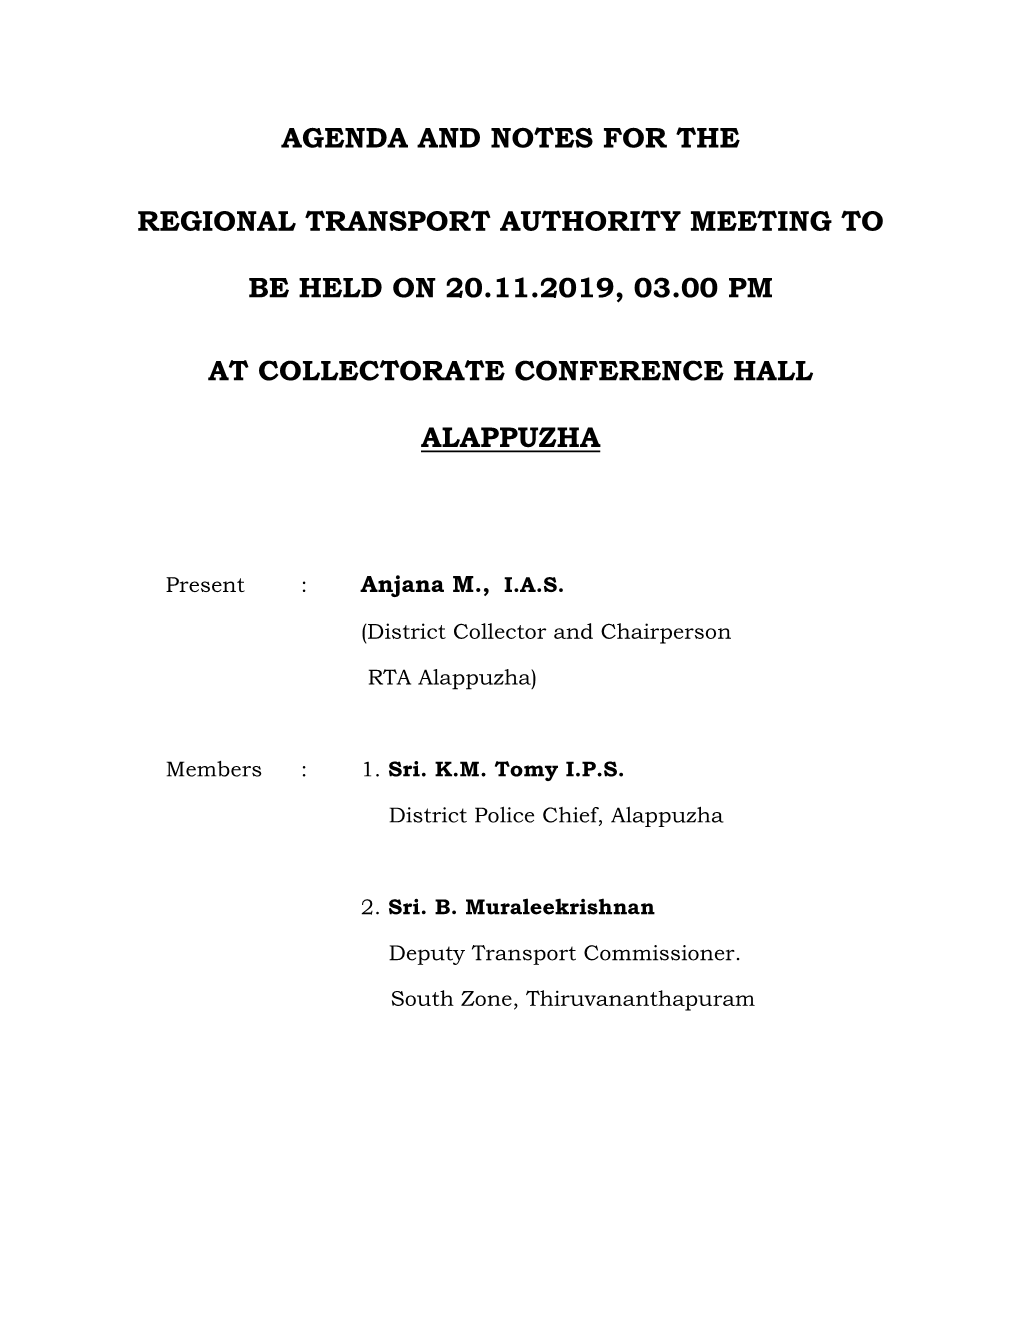 Agenda and Notes for the Regional Transport Authority Meeting to Be